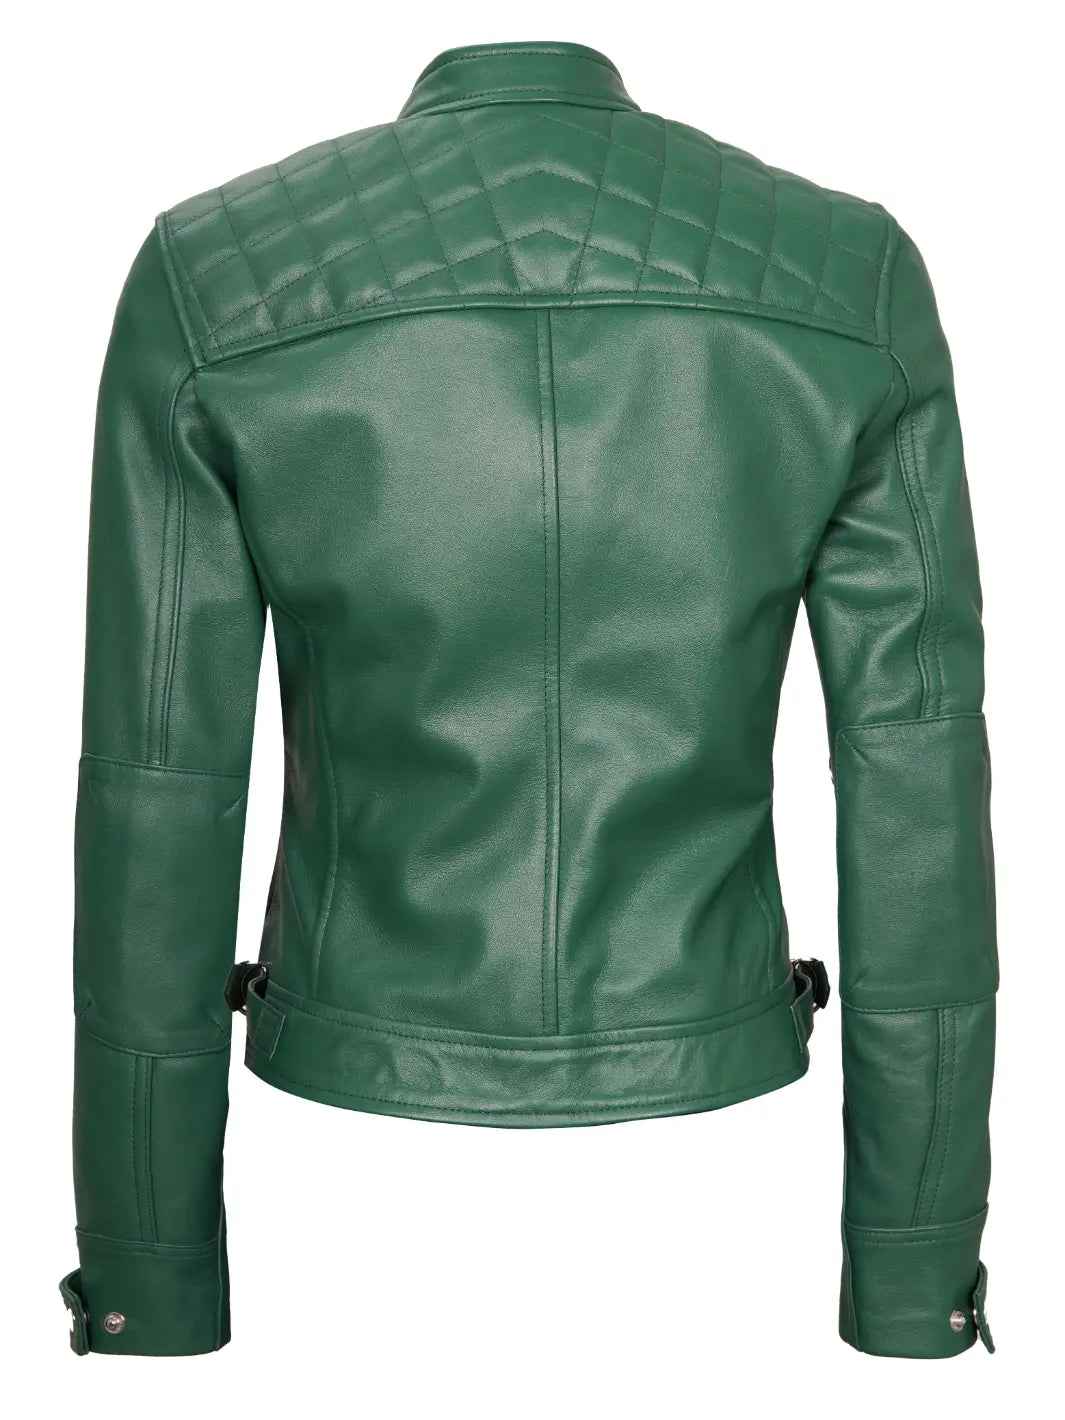 green leather jacket for women